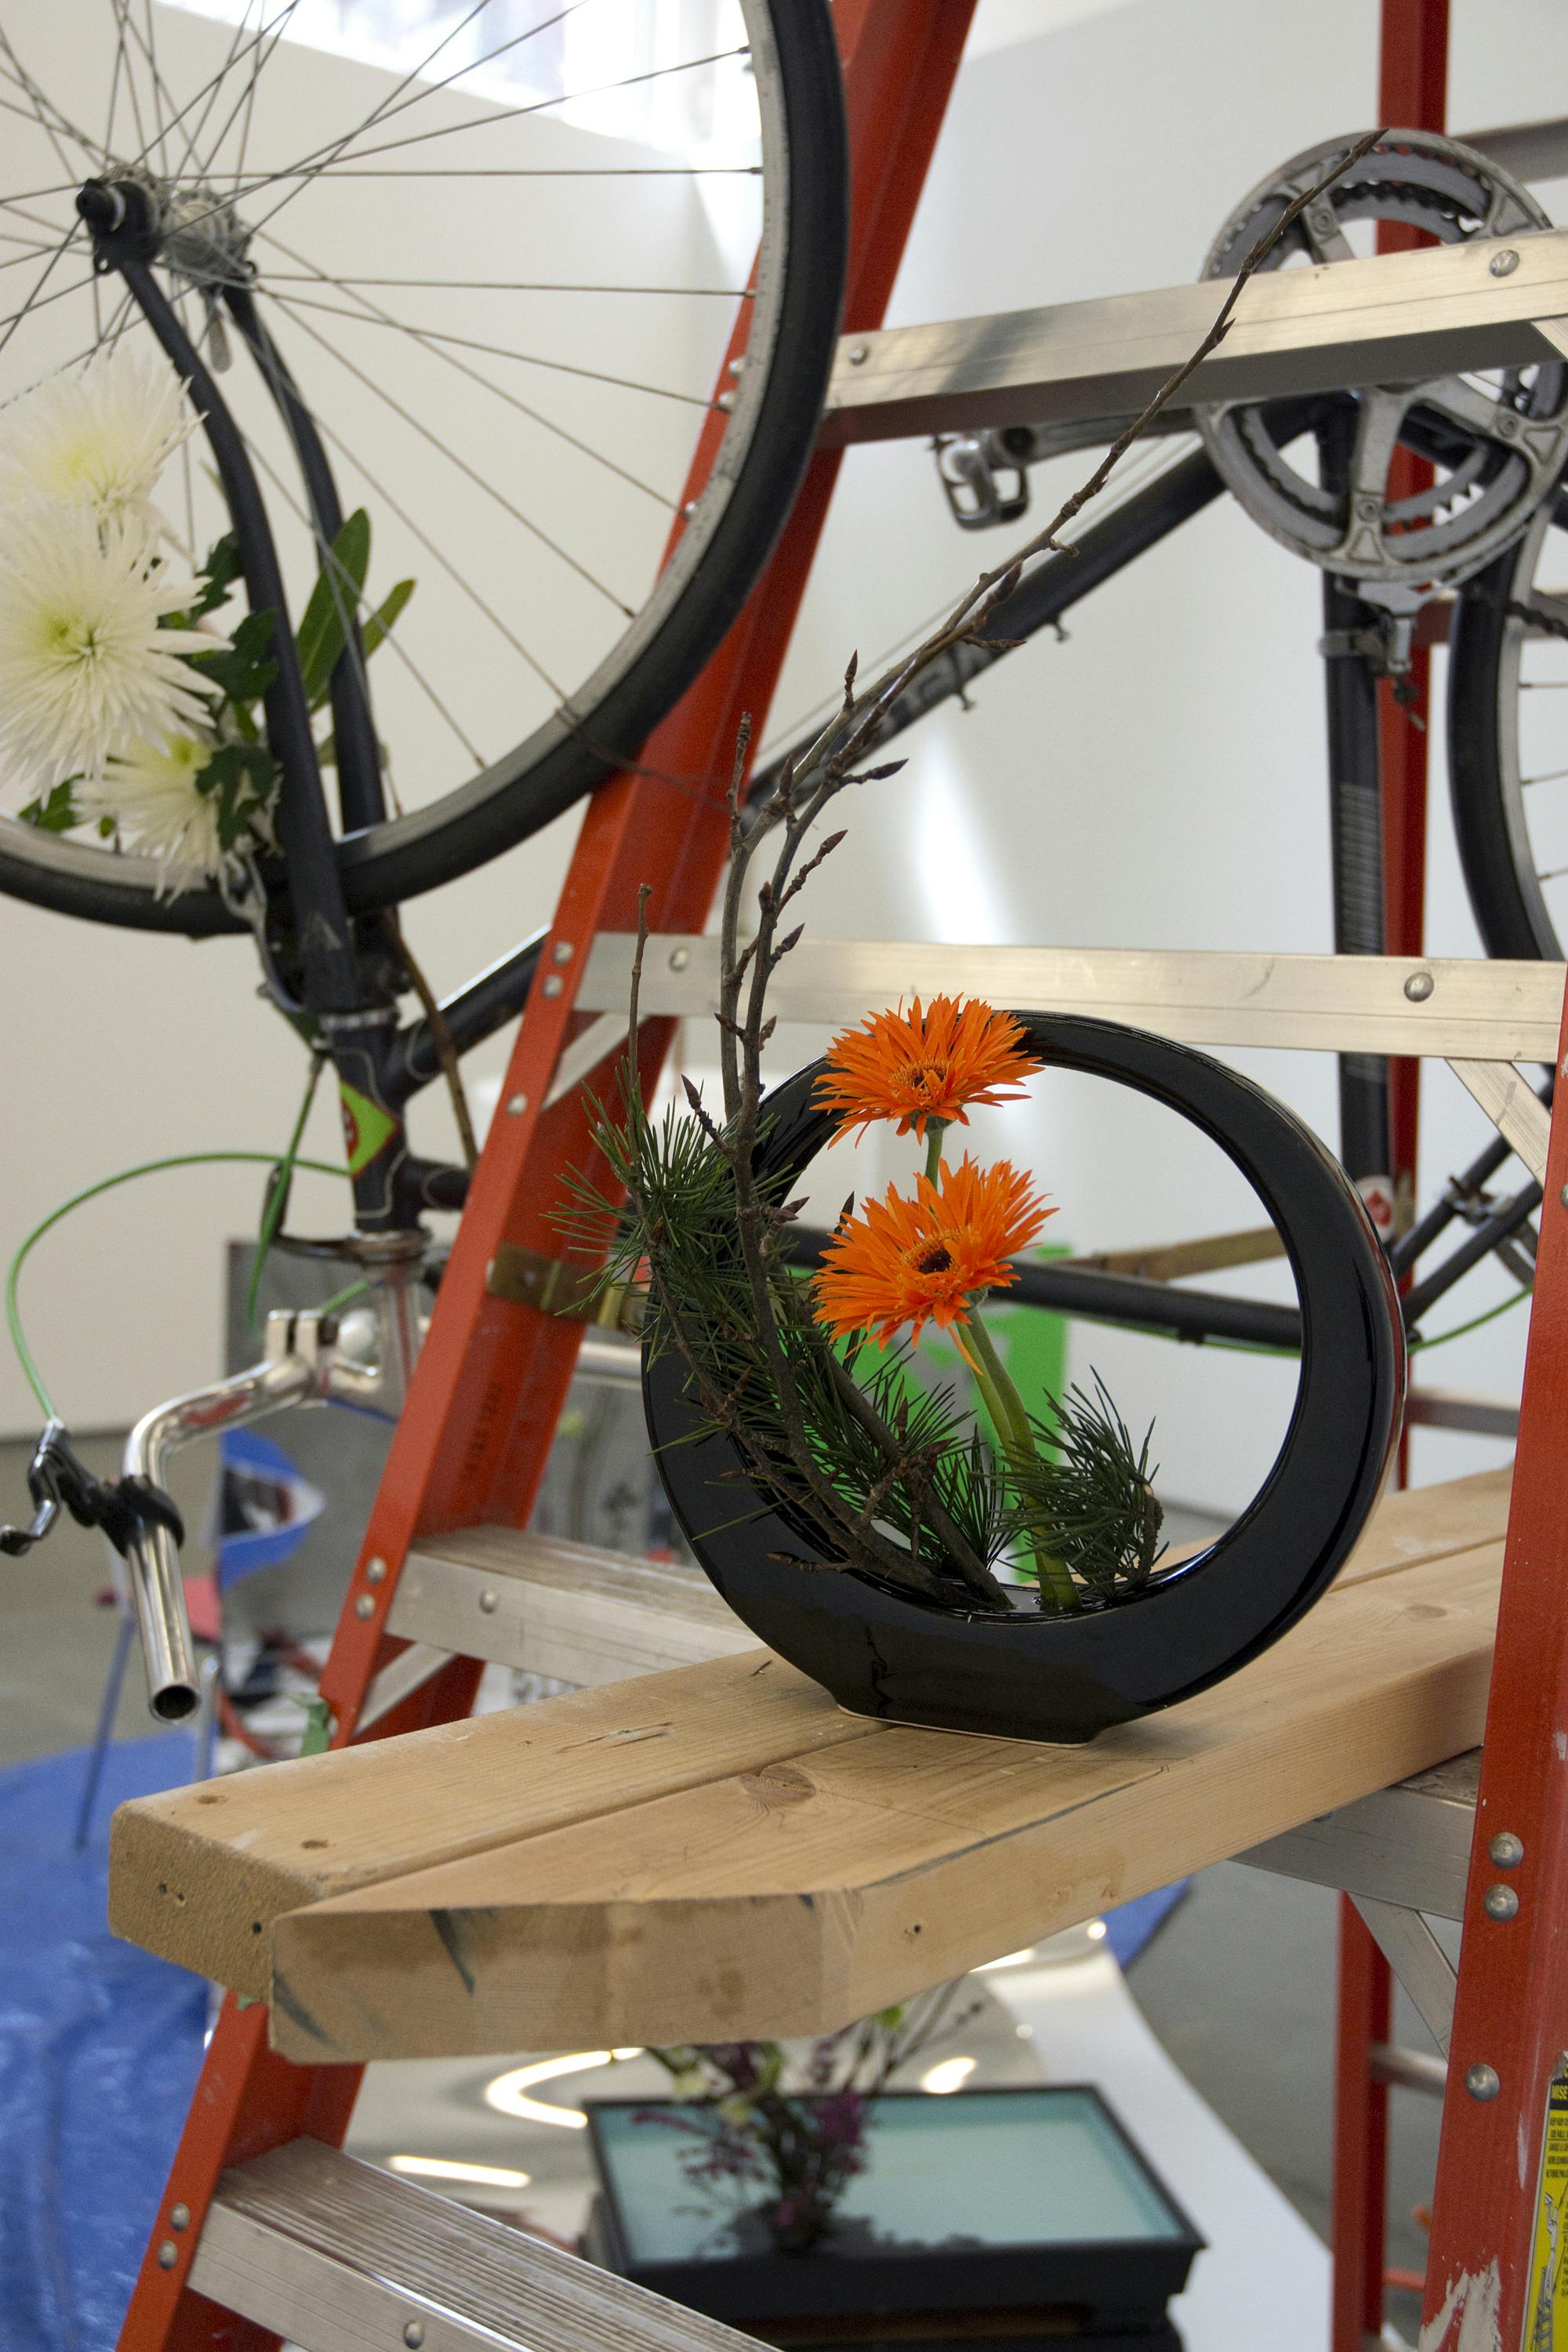 A detailed view of a sculpture installation. Orange gerberas and small twigs are arranged in a small black ikebana flower vase. The vase is situated on wood bars placed on a step ladder. 